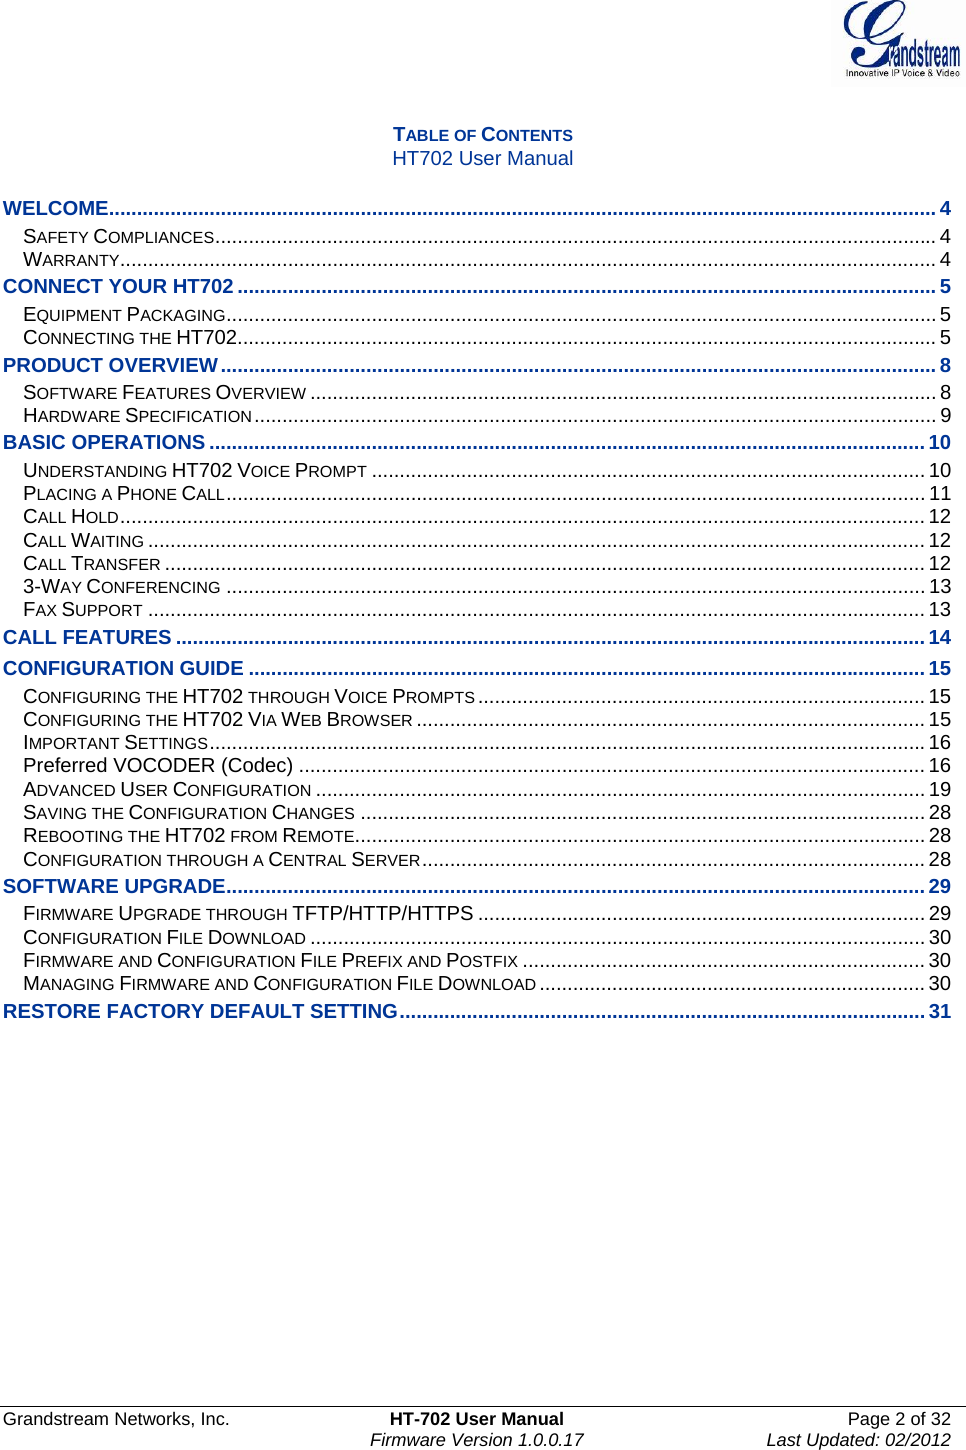  Grandstream Networks, Inc.  HT-702 User Manual  Page 2 of 32    Firmware Version 1.0.0.17  Last Updated: 02/2012   TABLE OF CONTENTS HT702 User Manual  WELCOME.................................................................................................................................................... 4SAFETY COMPLIANCES................................................................................................................................. 4WARRANTY.................................................................................................................................................. 4CONNECT YOUR HT702 ............................................................................................................................. 5EQUIPMENT PACKAGING...............................................................................................................................5CONNECTING THE HT702............................................................................................................................. 5PRODUCT OVERVIEW................................................................................................................................ 8SOFTWARE FEATURES OVERVIEW ................................................................................................................ 8HARDWARE SPECIFICATION.......................................................................................................................... 9BASIC OPERATIONS ................................................................................................................................10UNDERSTANDING HT702 VOICE PROMPT ................................................................................................... 10PLACING A PHONE CALL............................................................................................................................. 11CALL HOLD................................................................................................................................................ 12CALL WAITING ........................................................................................................................................... 12CALL TRANSFER ........................................................................................................................................ 123-WAY CONFERENCING ............................................................................................................................. 13FAX SUPPORT ........................................................................................................................................... 13CALL FEATURES ......................................................................................................................................14CONFIGURATION GUIDE .........................................................................................................................15CONFIGURING THE HT702 THROUGH VOICE PROMPTS ................................................................................ 15CONFIGURING THE HT702 VIA WEB BROWSER ........................................................................................... 15IMPORTANT SETTINGS................................................................................................................................16Preferred VOCODER (Codec) ................................................................................................................ 16ADVANCED USER CONFIGURATION ............................................................................................................. 19SAVING THE CONFIGURATION CHANGES ..................................................................................................... 28REBOOTING THE HT702 FROM REMOTE...................................................................................................... 28CONFIGURATION THROUGH A CENTRAL SERVER.......................................................................................... 28SOFTWARE UPGRADE.............................................................................................................................29FIRMWARE UPGRADE THROUGH TFTP/HTTP/HTTPS ................................................................................ 29CONFIGURATION FILE DOWNLOAD .............................................................................................................. 30FIRMWARE AND CONFIGURATION FILE PREFIX AND POSTFIX ........................................................................ 30MANAGING FIRMWARE AND CONFIGURATION FILE DOWNLOAD ..................................................................... 30RESTORE FACTORY DEFAULT SETTING..............................................................................................31                